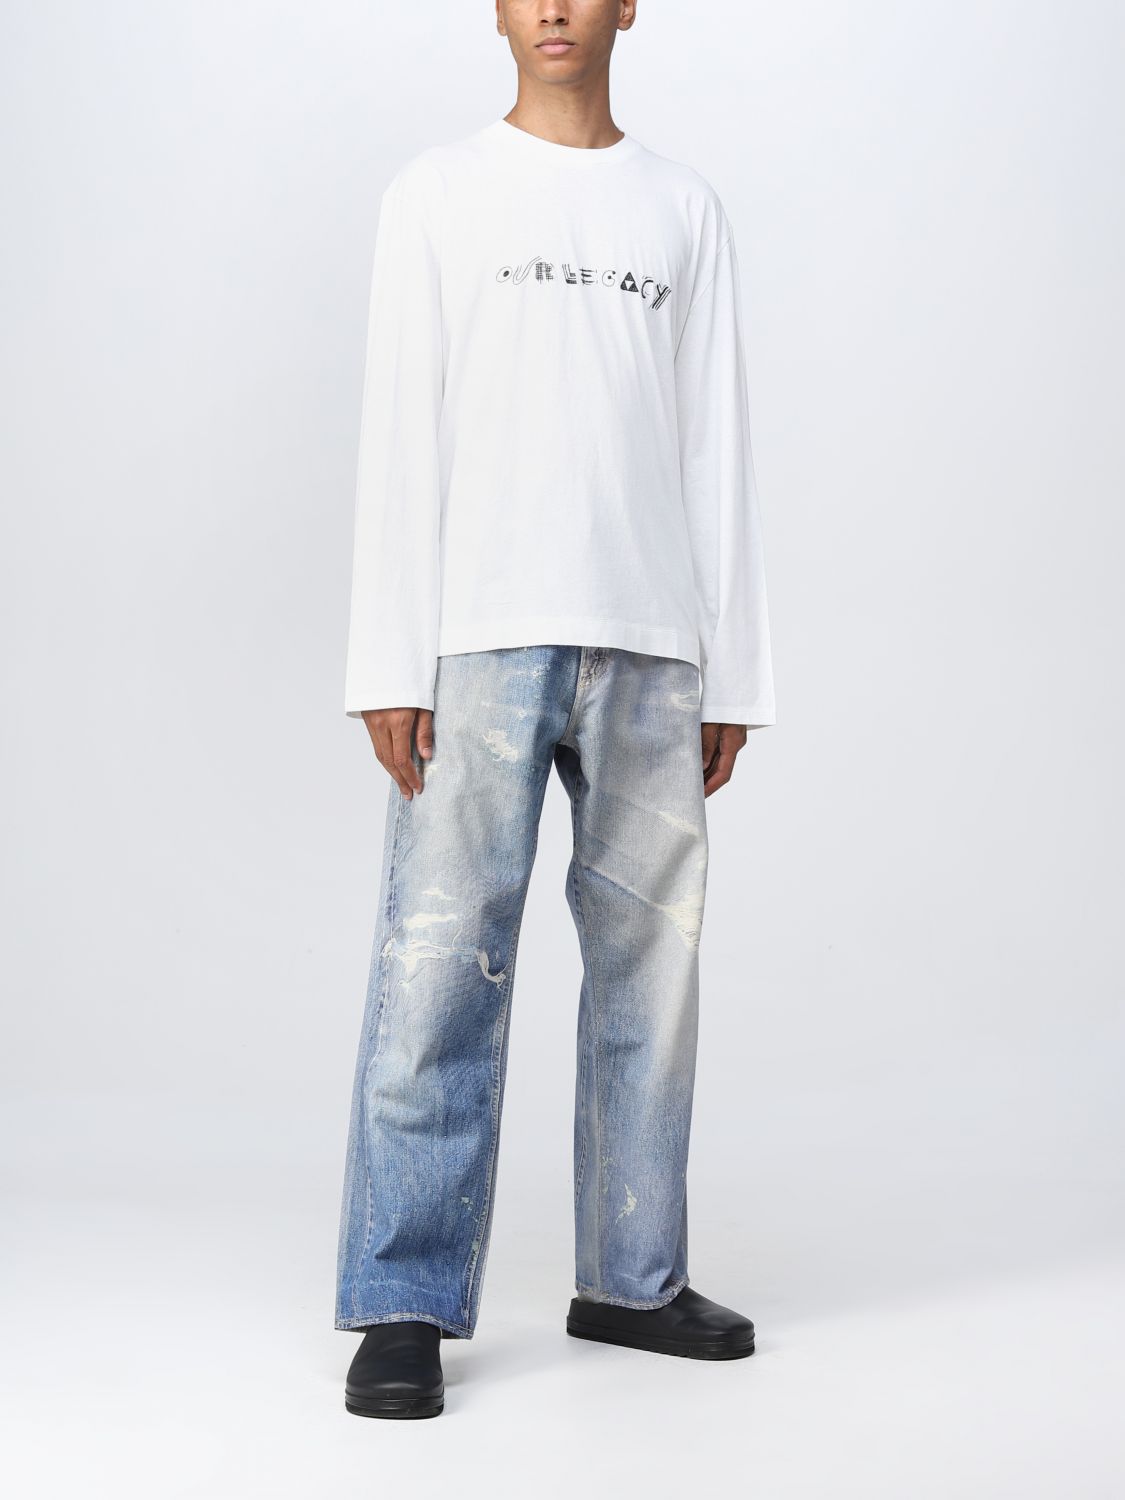 T-shirt Our Legacy: T-shirt Our Legacy homme blanc 2